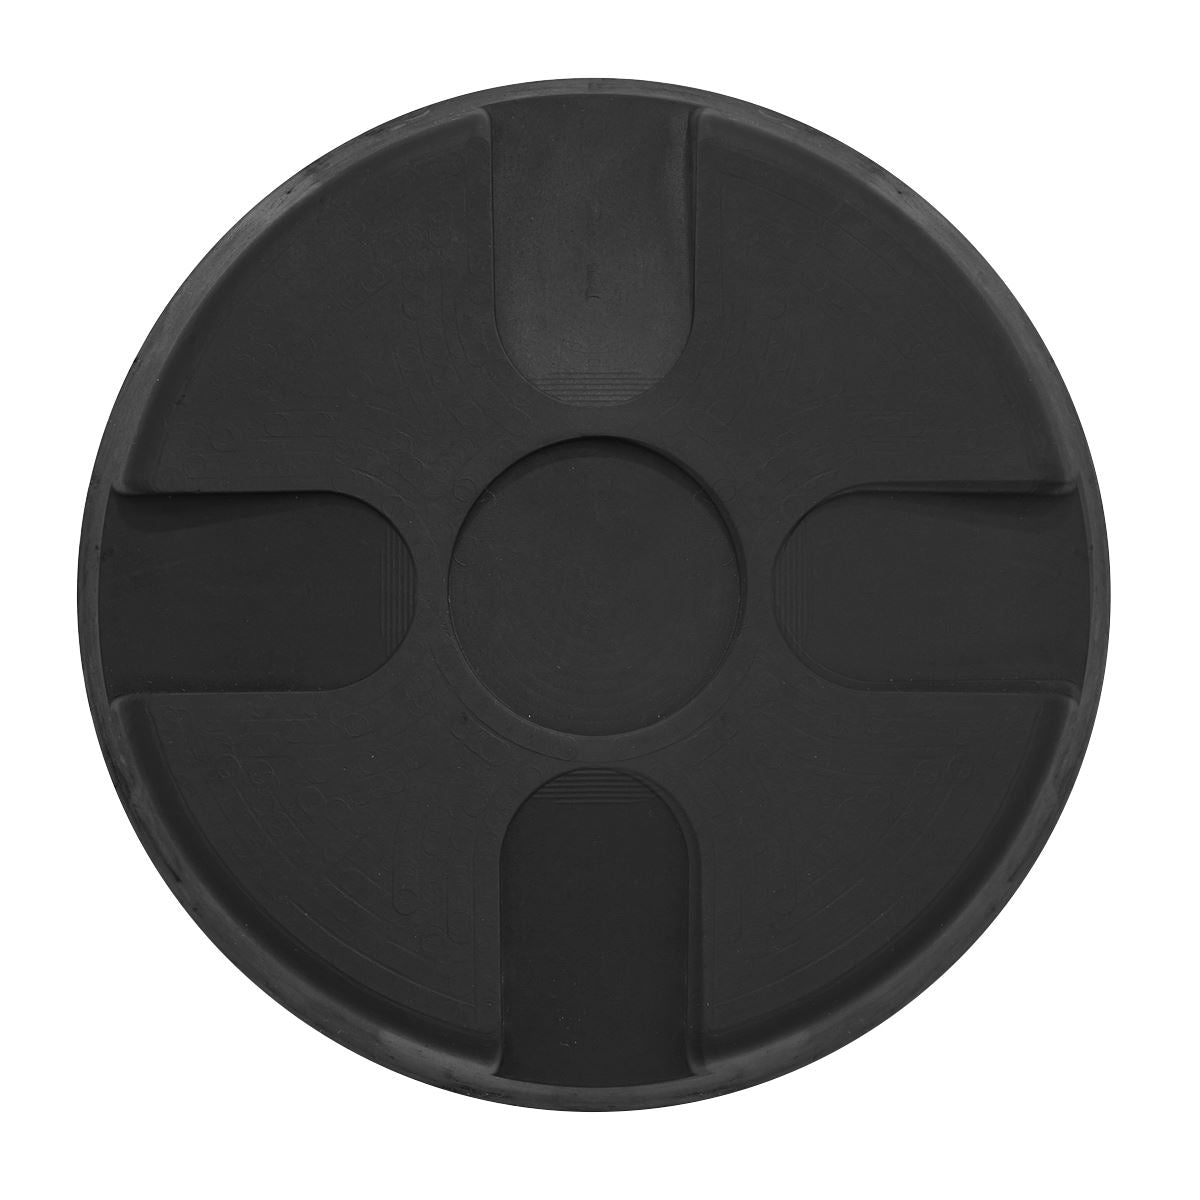 Sealey Safety Rubber Trolley Jack Pad Type B To Fit 112-117mm Saddle